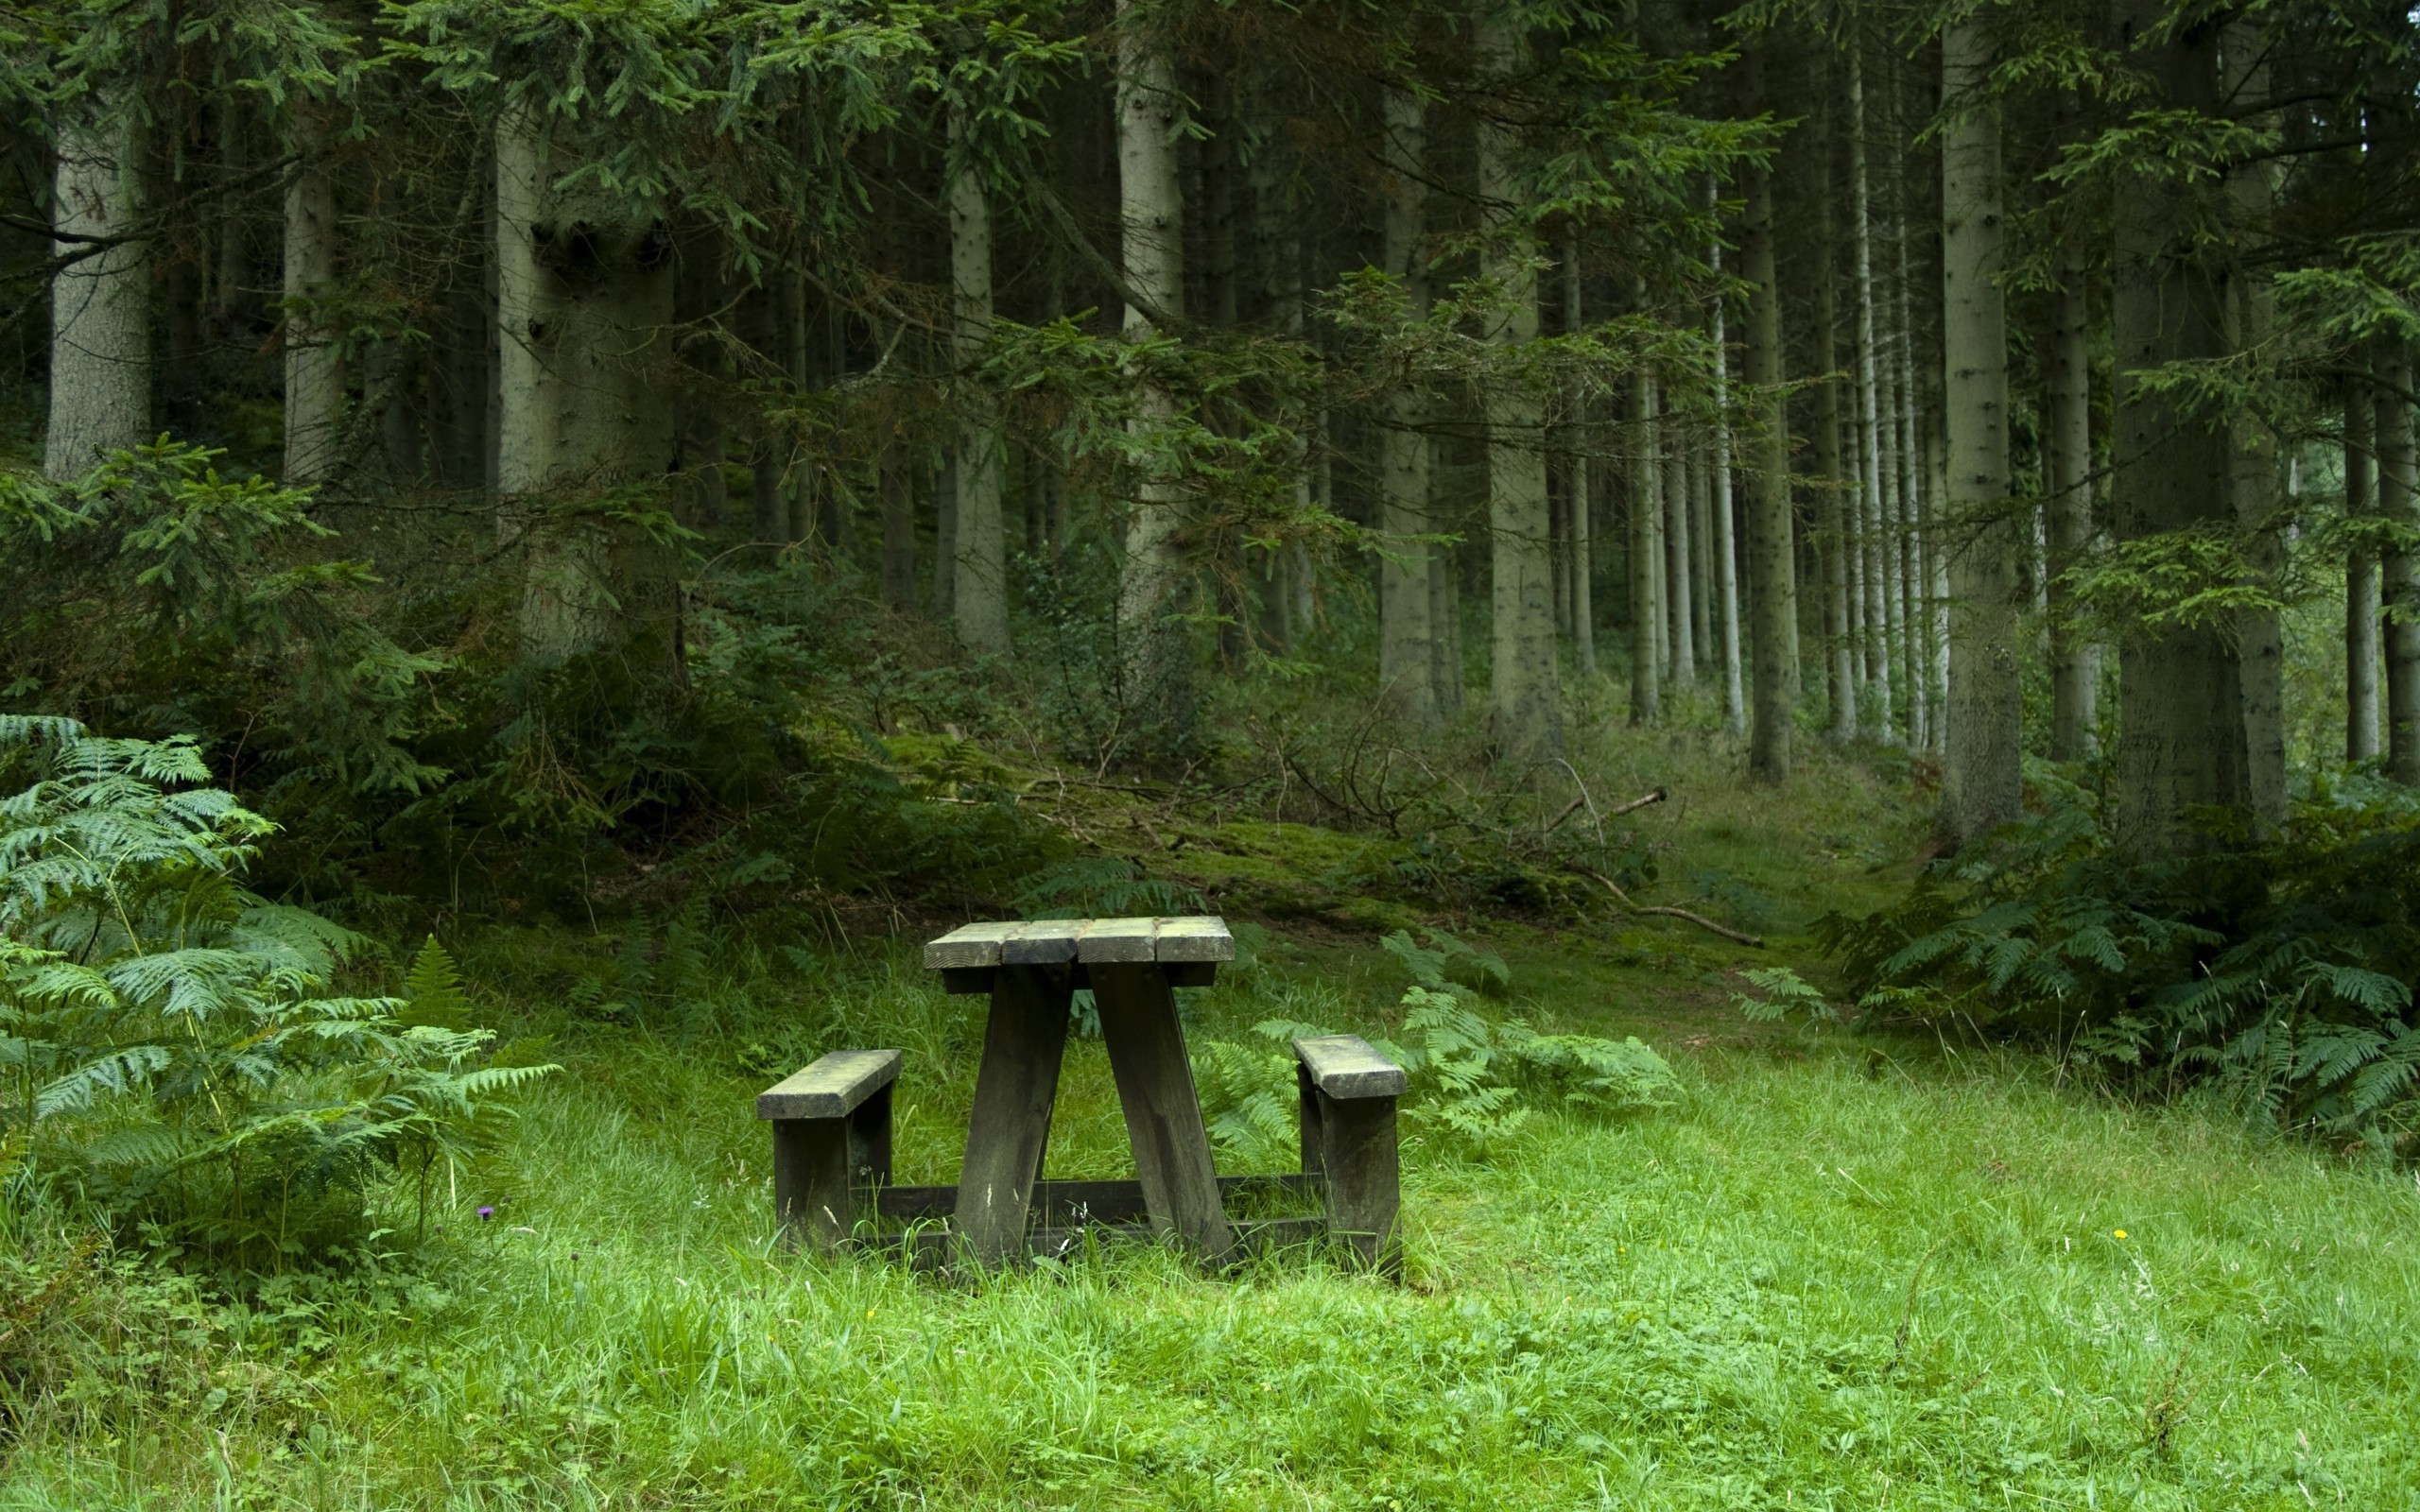 A table with benches in a summer forest